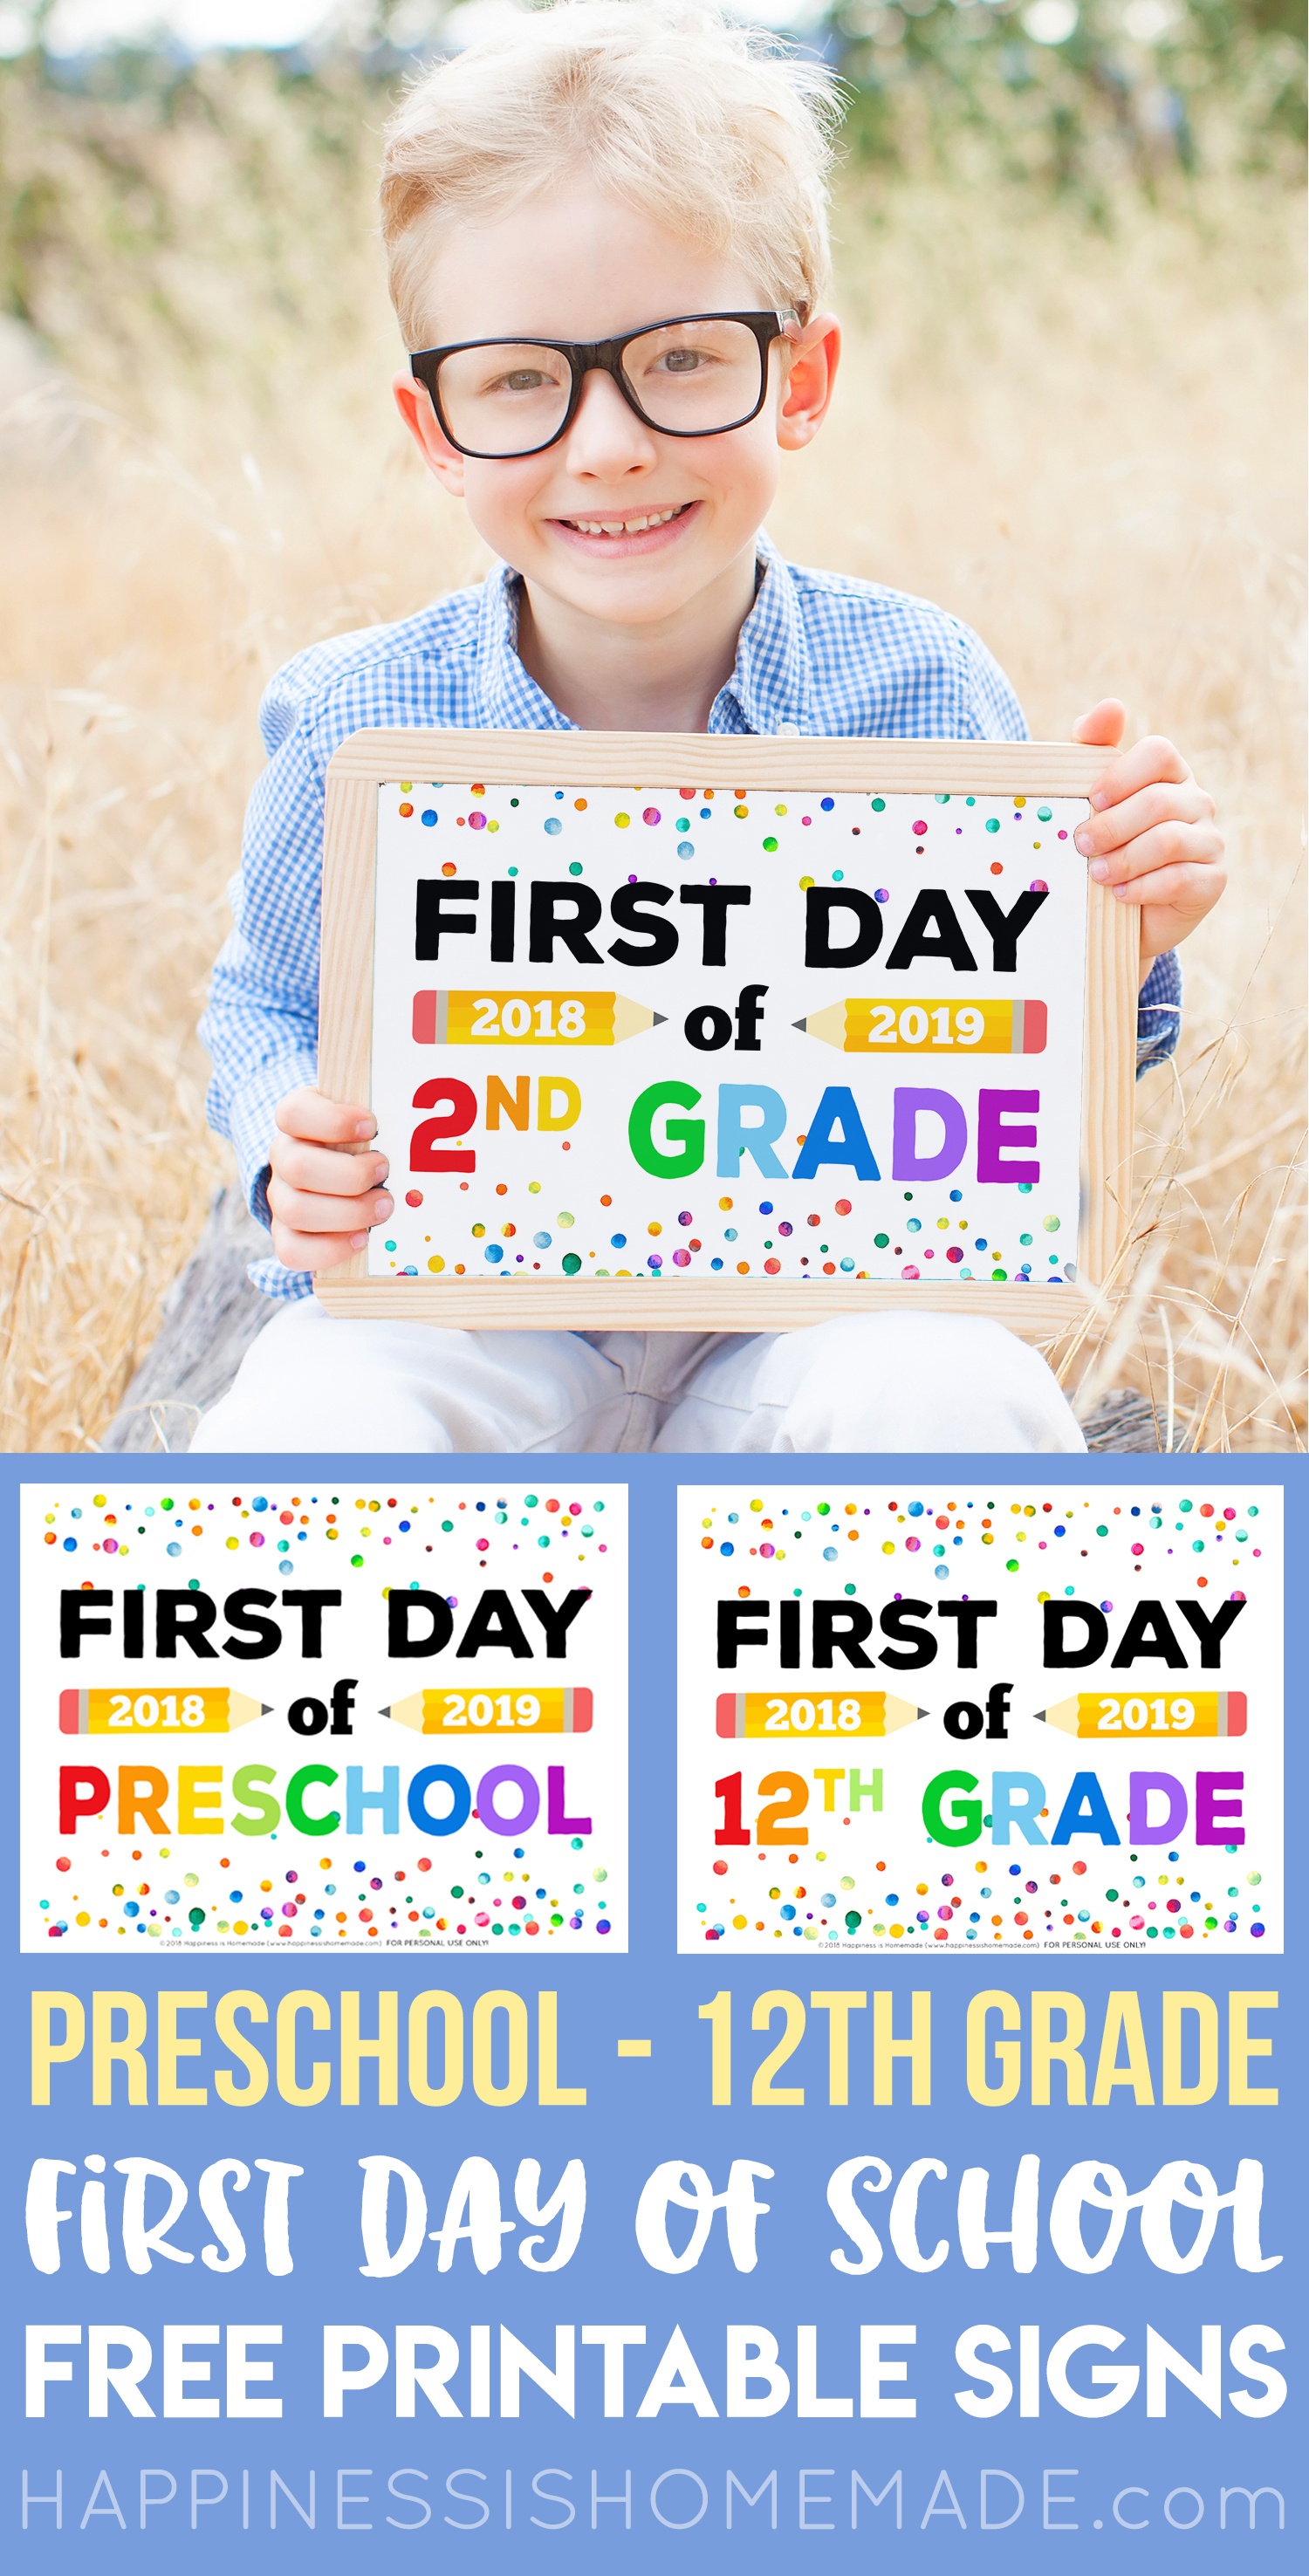 First Day Of School Signs - Free Printables - Happiness Is Homemade - Free Printable First Day Of School Signs